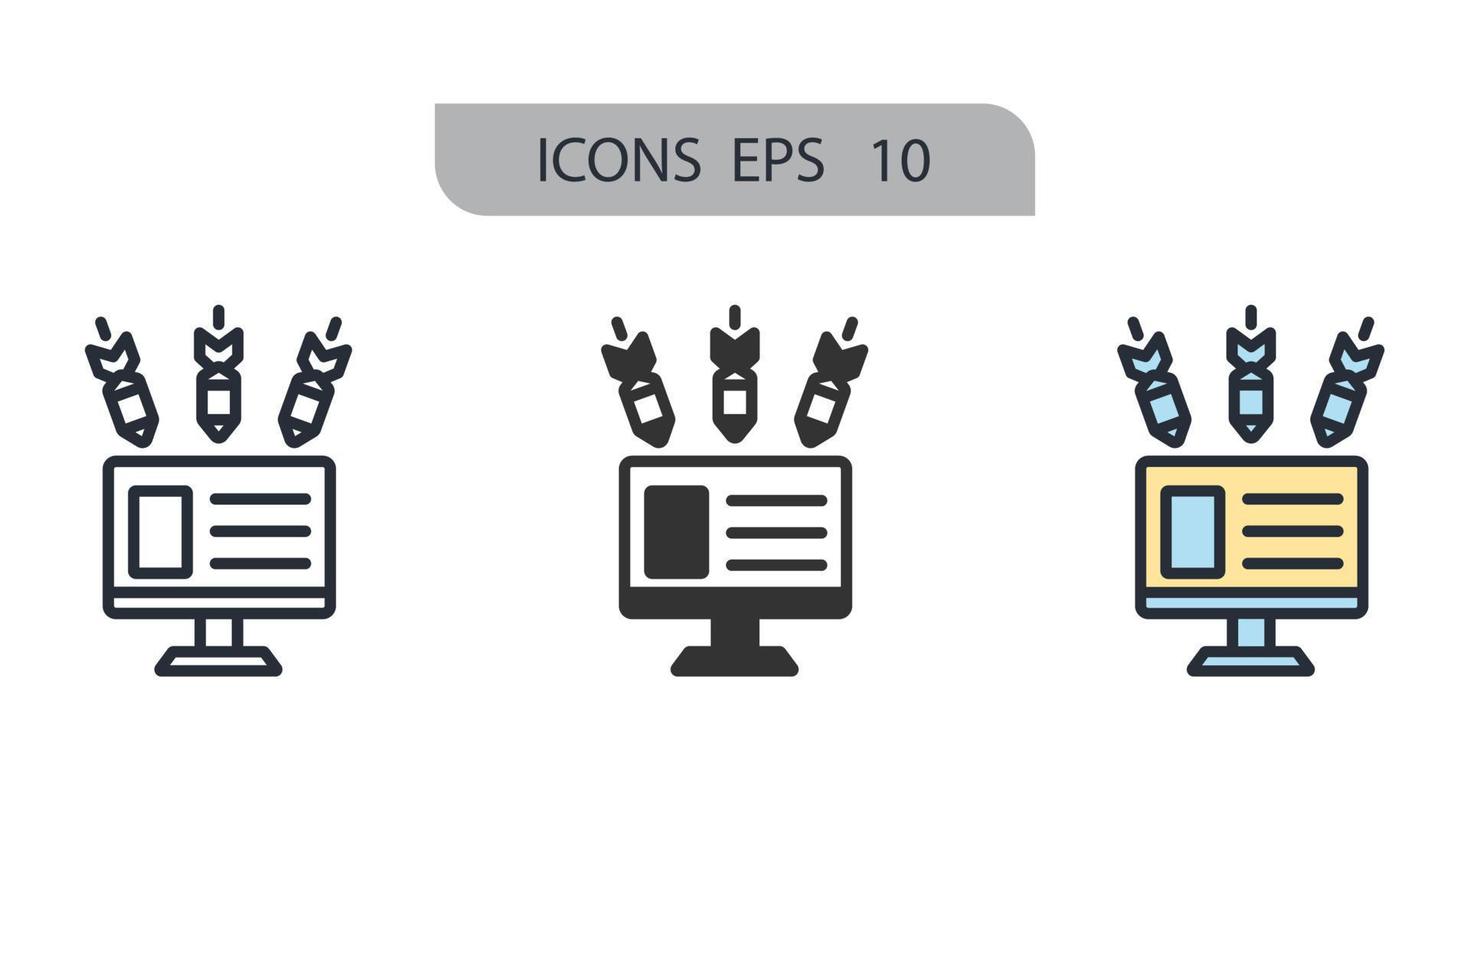 DDoS icons  symbol vector elements for infographic web